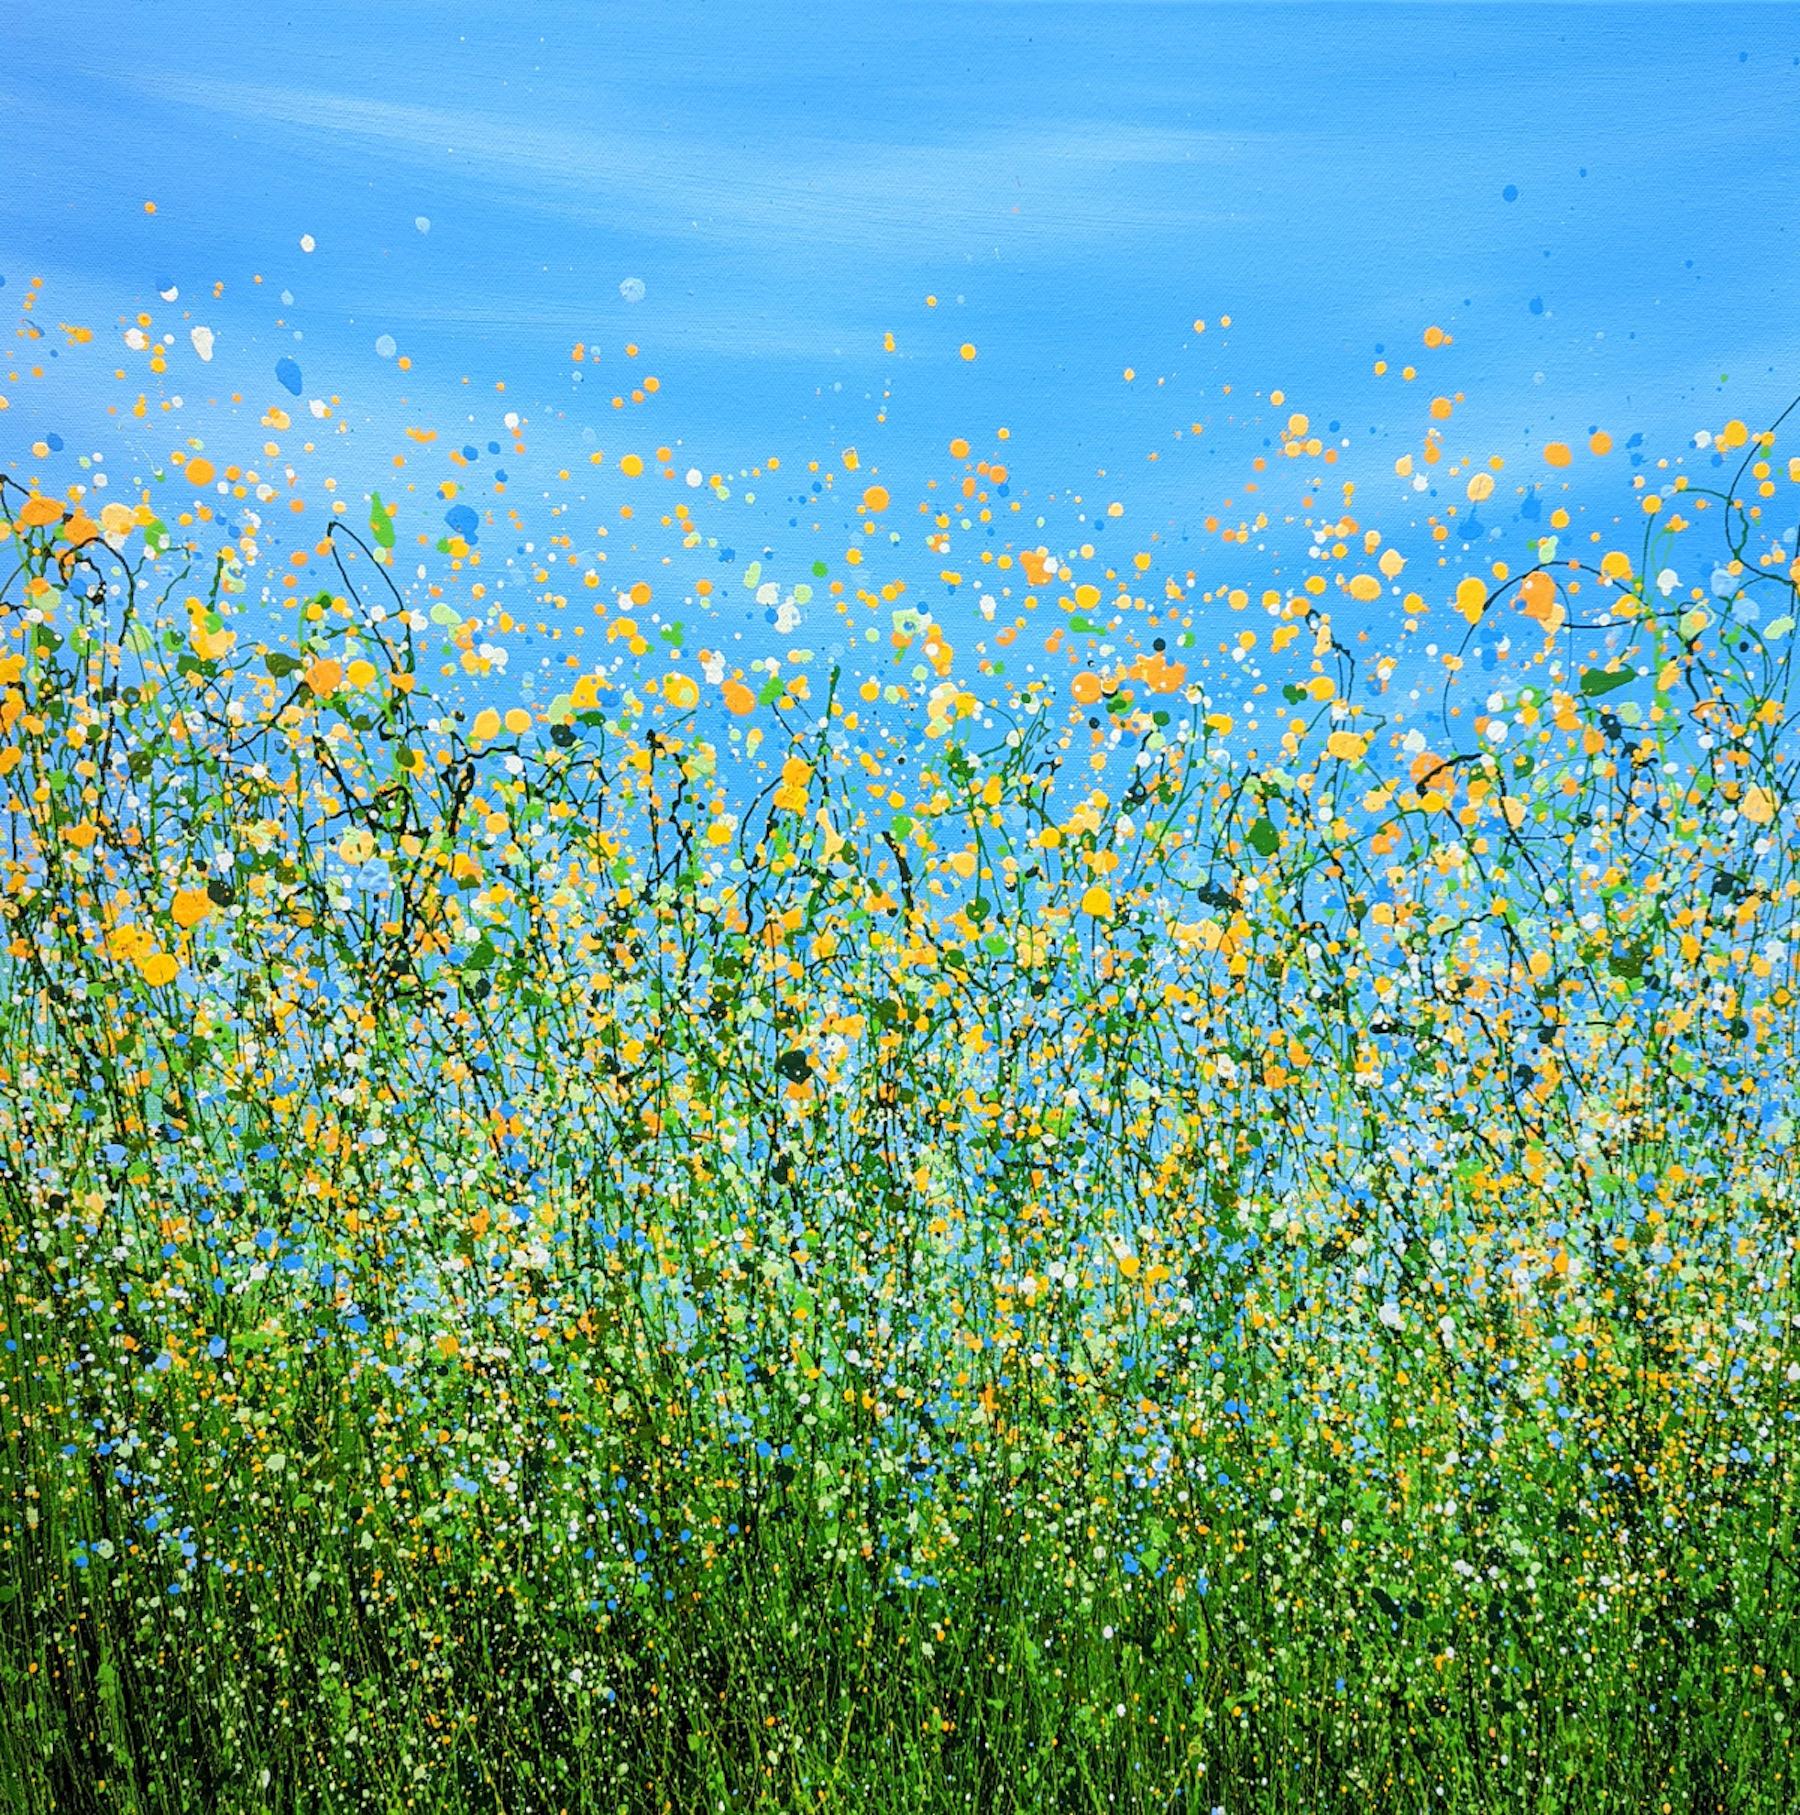 Sunny Side Up #3 [2023]
Please note that insitu images are purely an indication of how a piece may look

Sunny Side Up #3 - Exclusive to Wychwood. Nothing says spring is here like a popping up of daffodils. An Original semi-abstract painting by Lucy